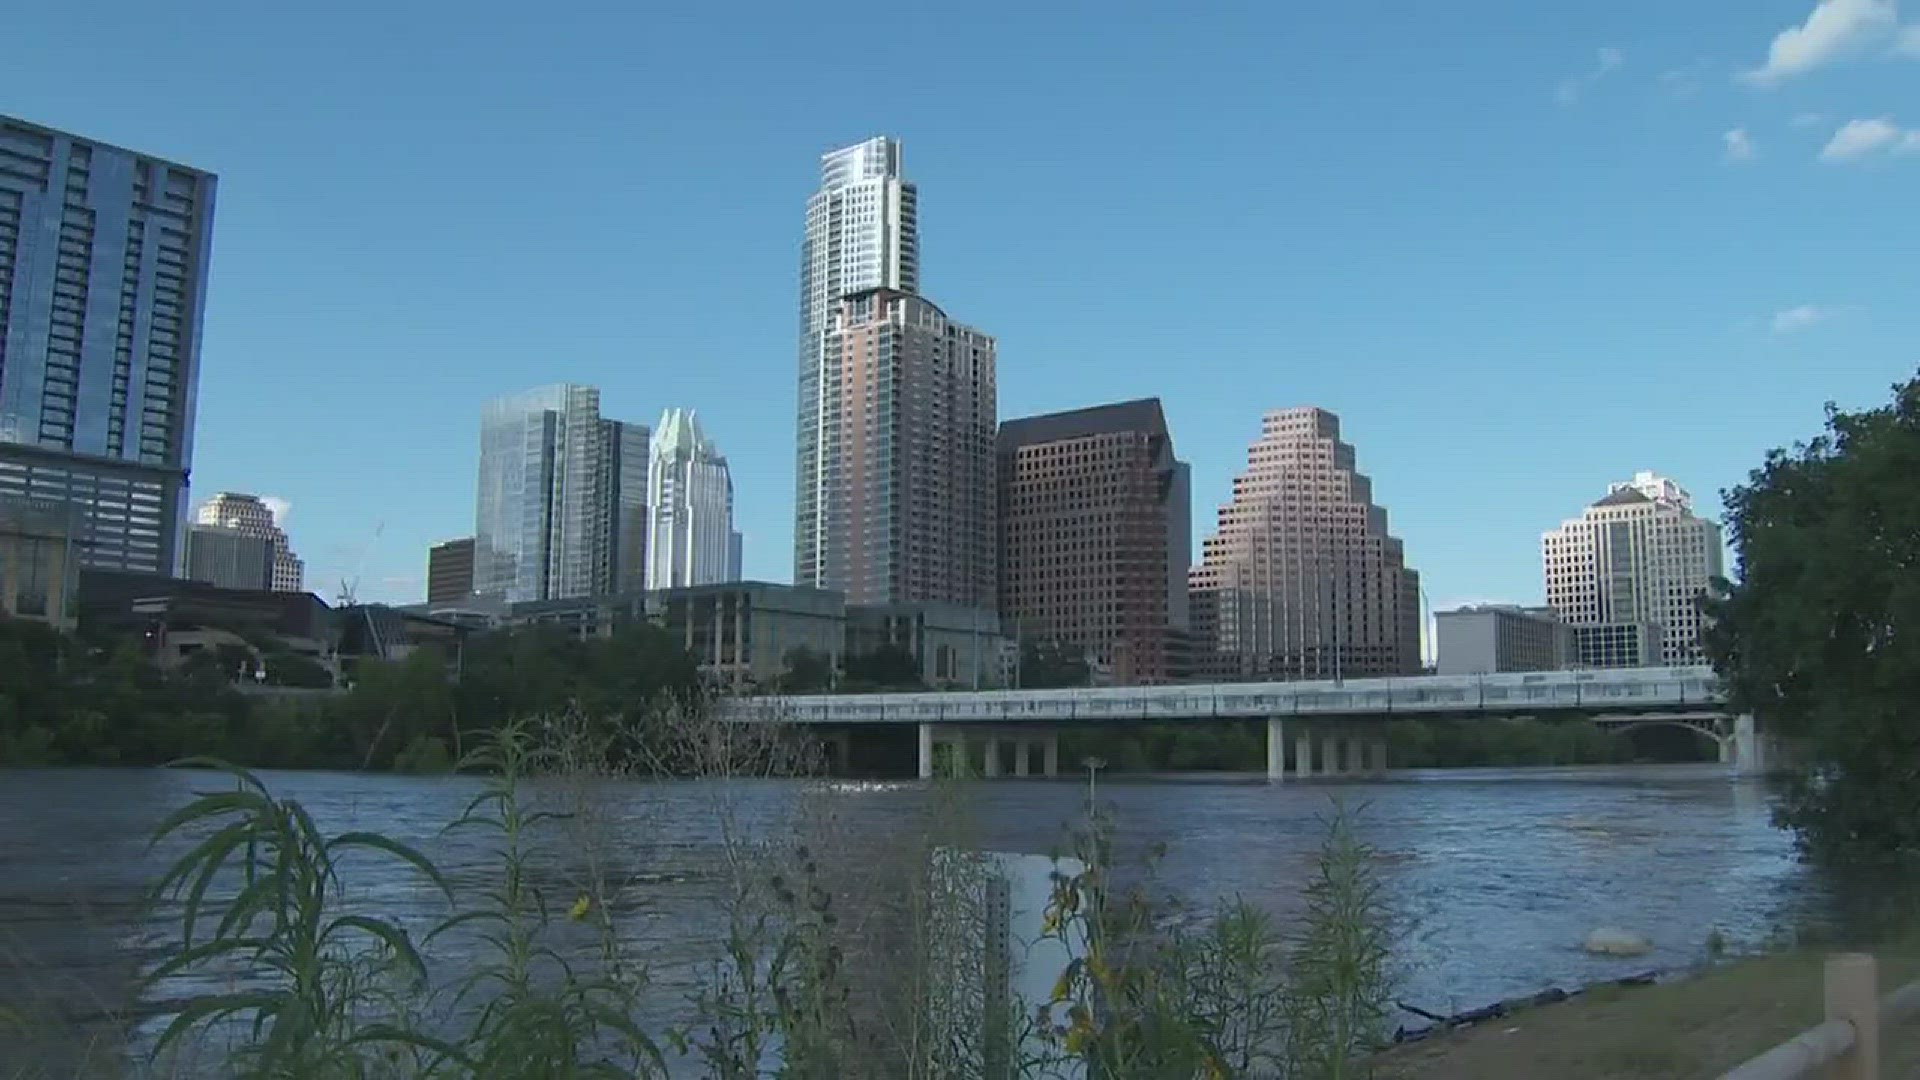 A report confirms what many already know: Austin is the best place to live in the U.S., knocking Denver off the top spot.